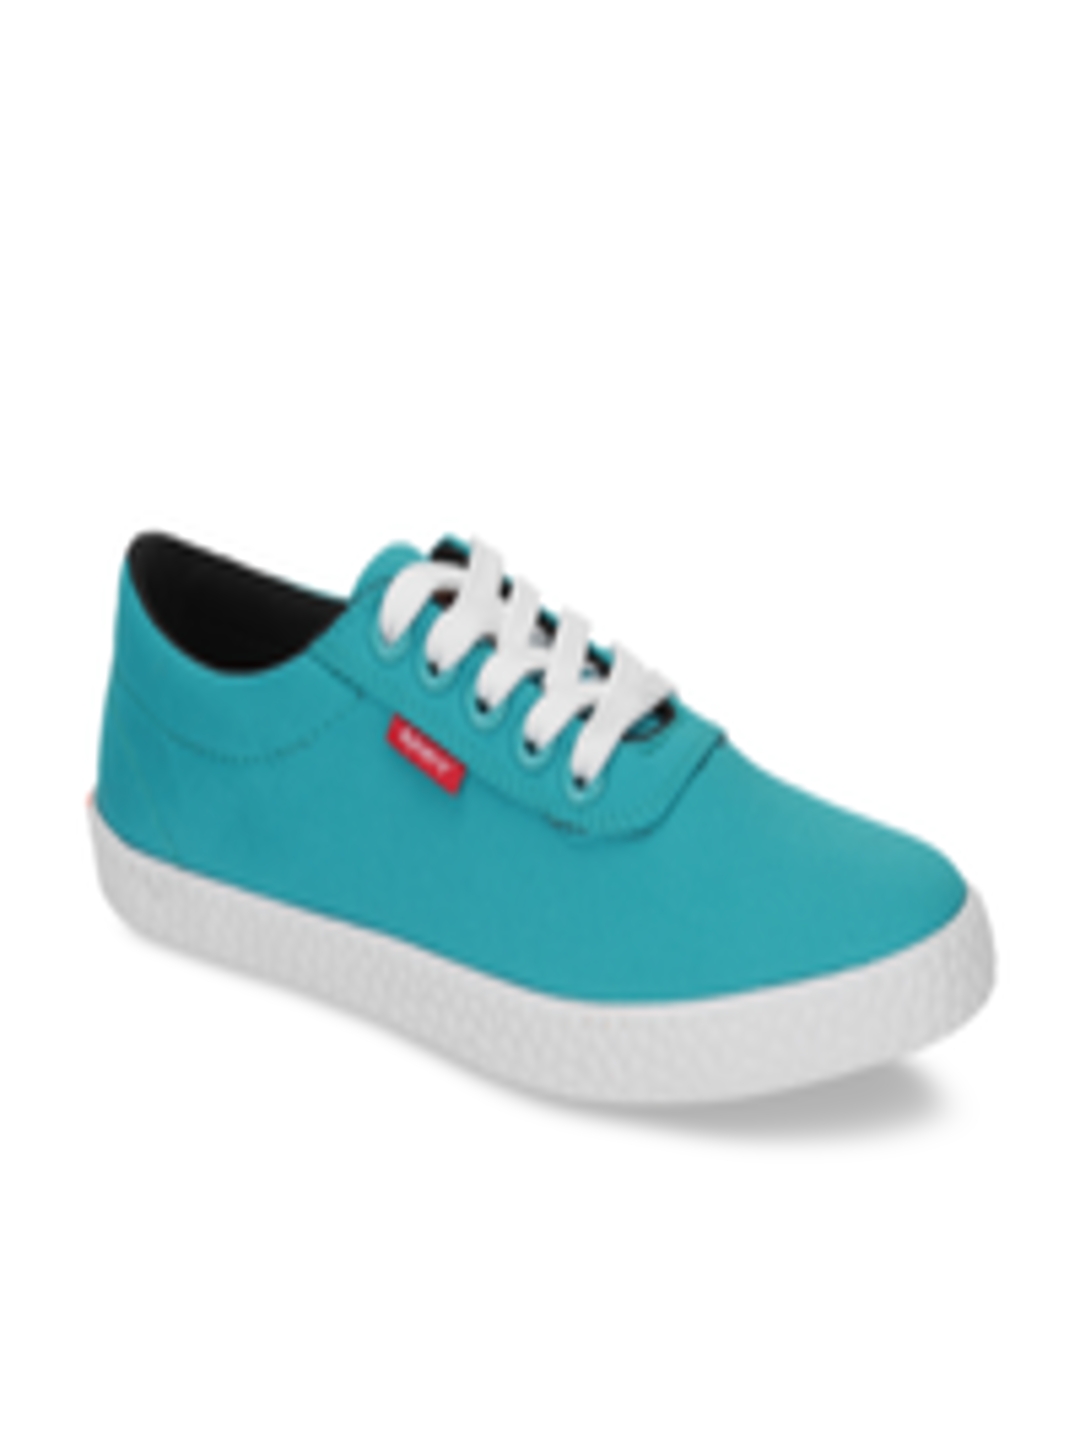 Buy Sparx Men Blue Sneakers - Casual Shoes for Men 8852891 | Myntra